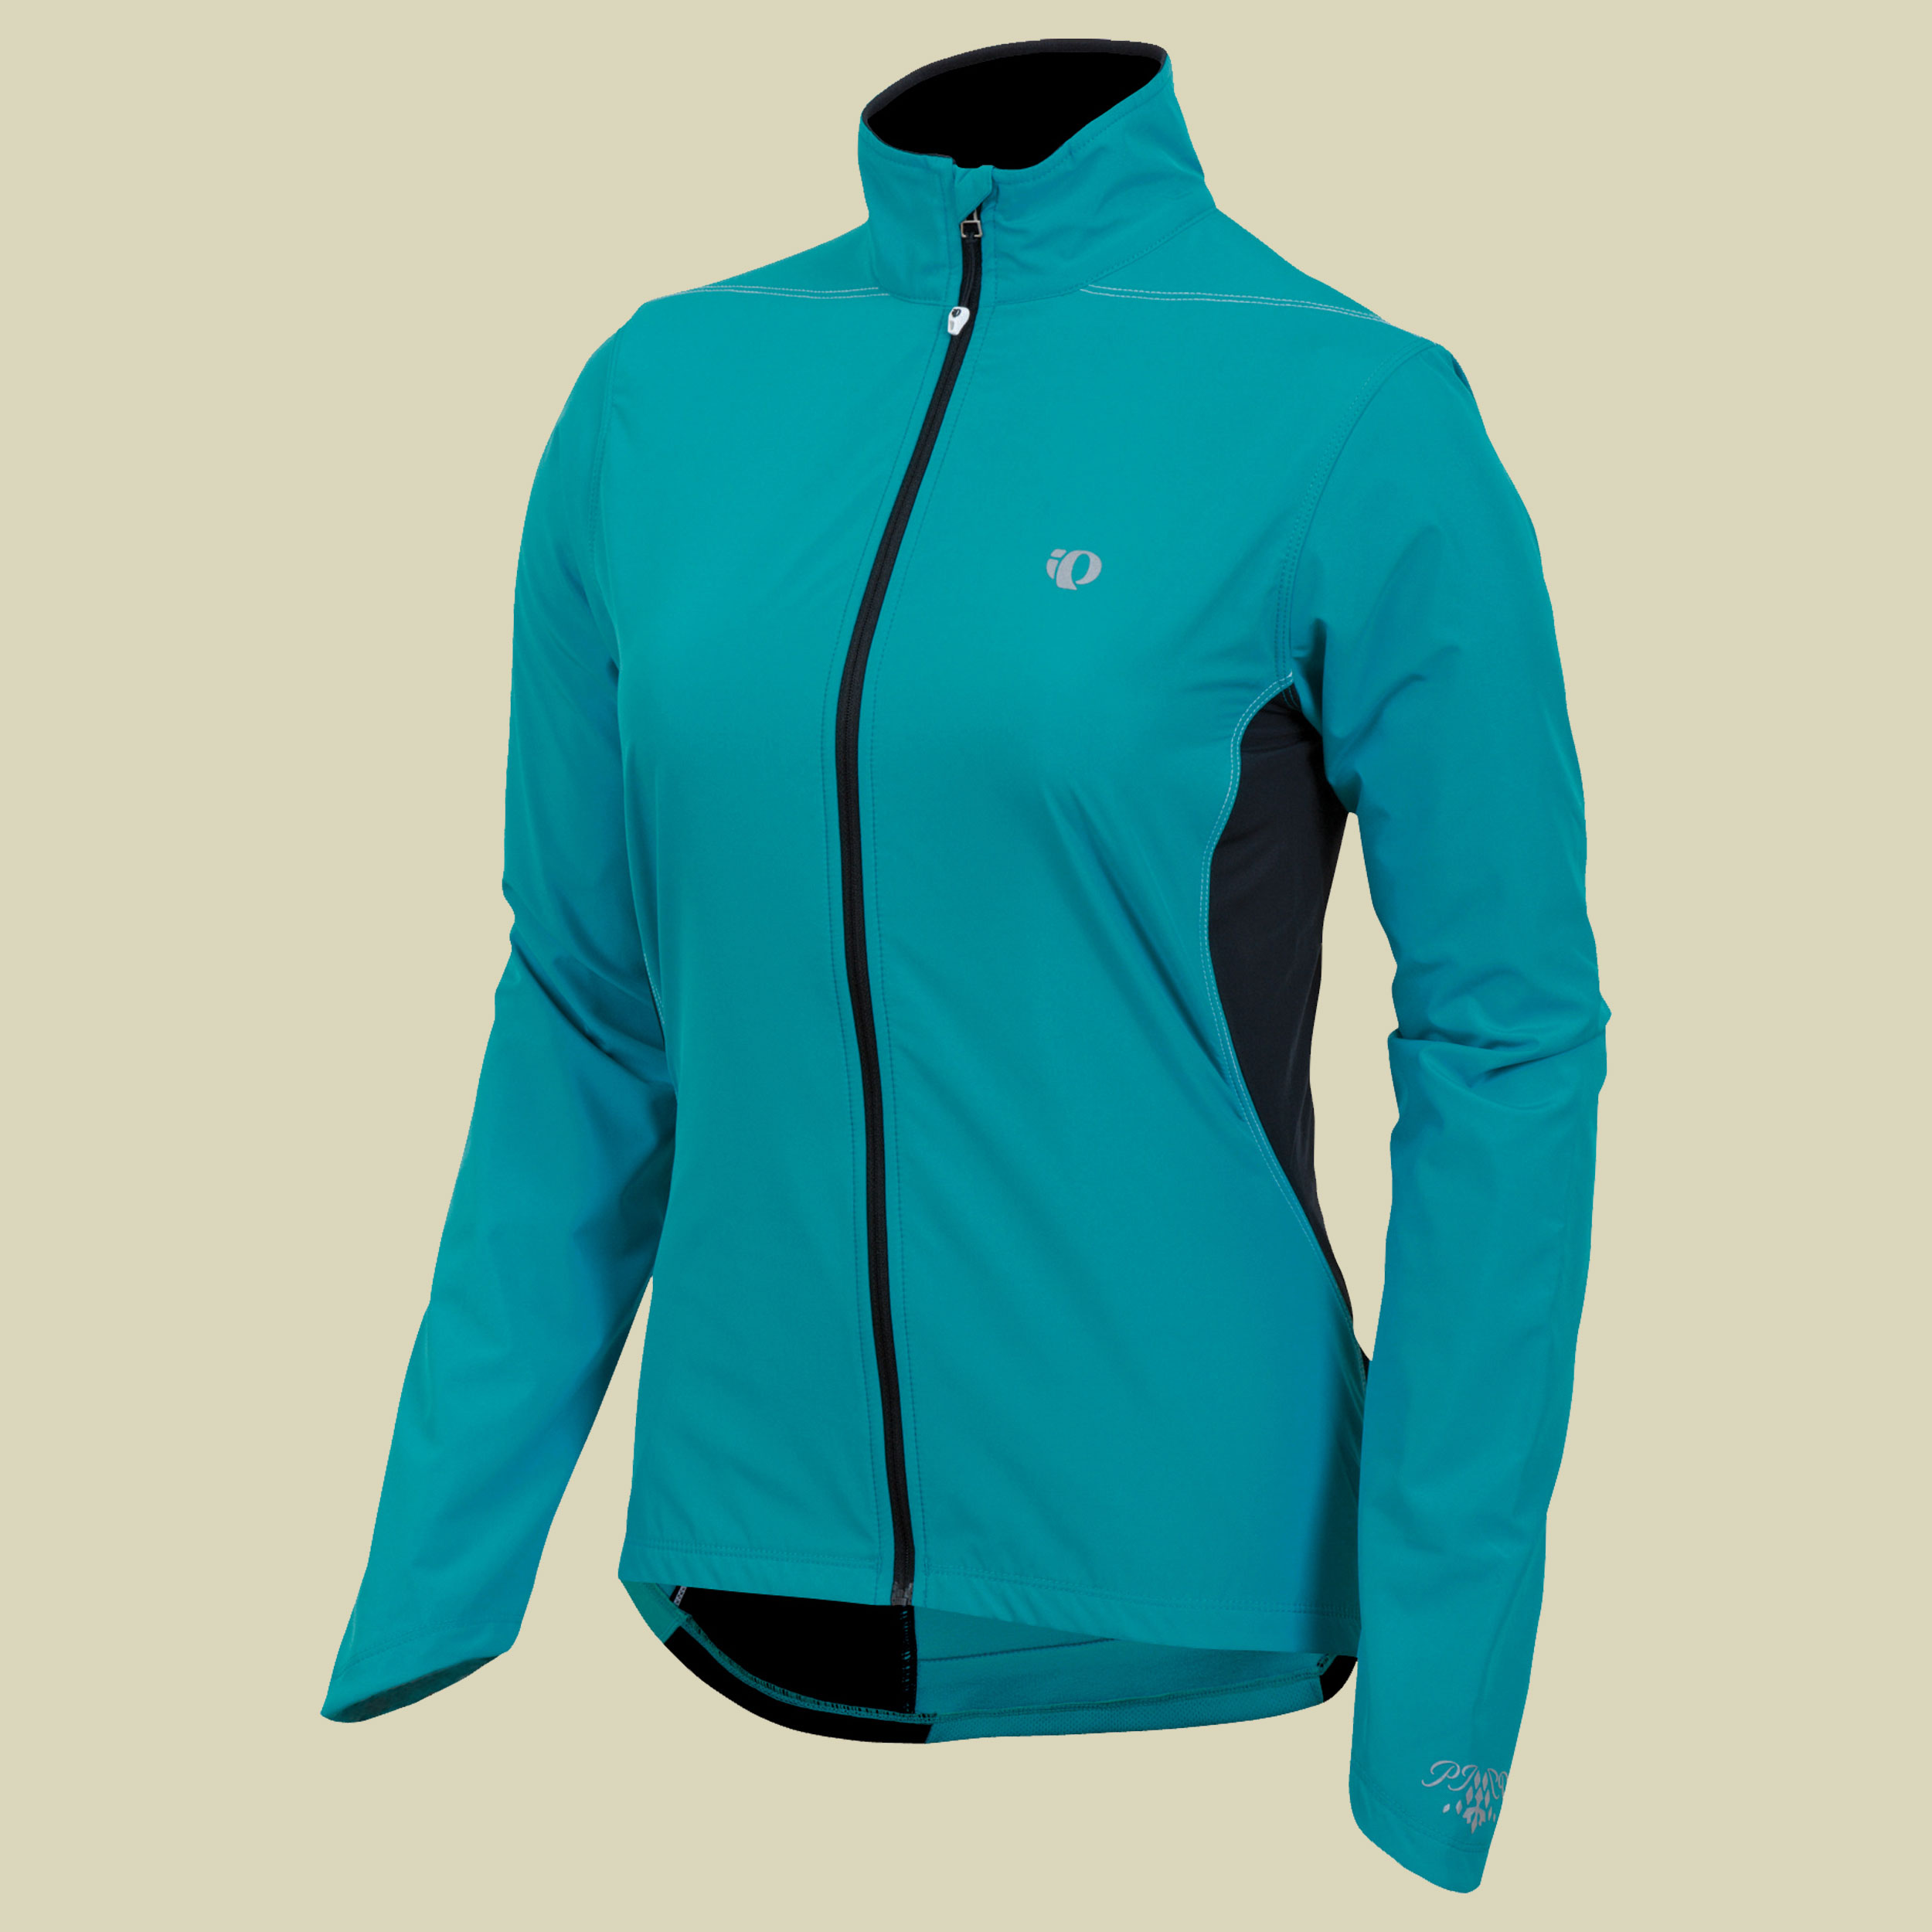 Select Thermal Barrier Jacket Women Größe S Farbe peacock